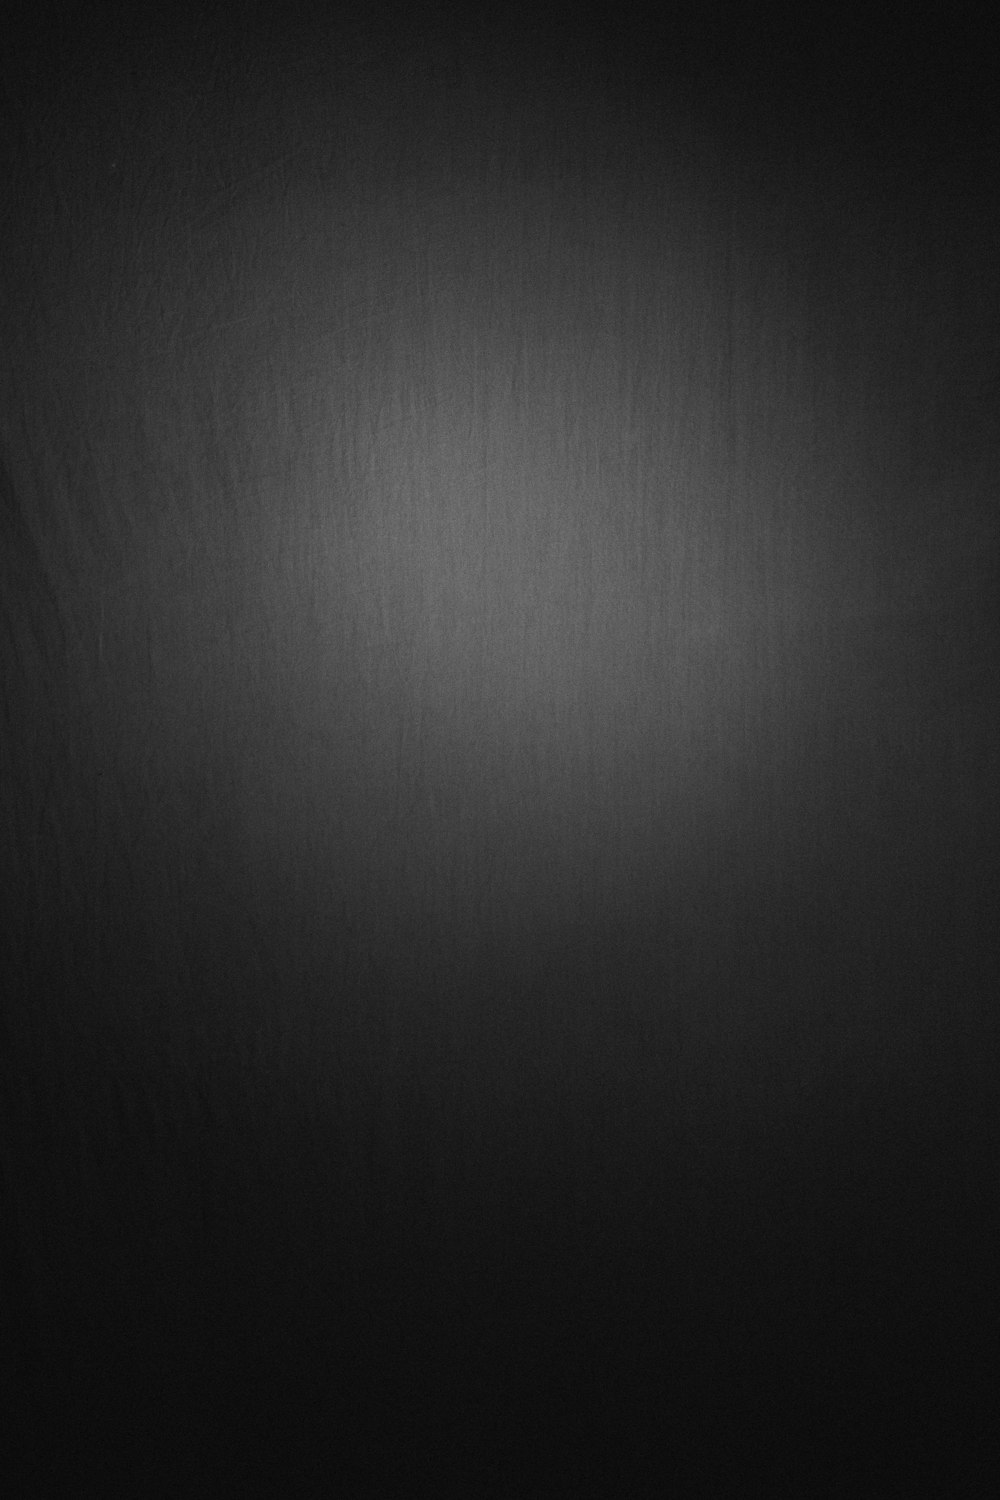 Grey Texture Pictures [HQ] | Download Free Images on Unsplash